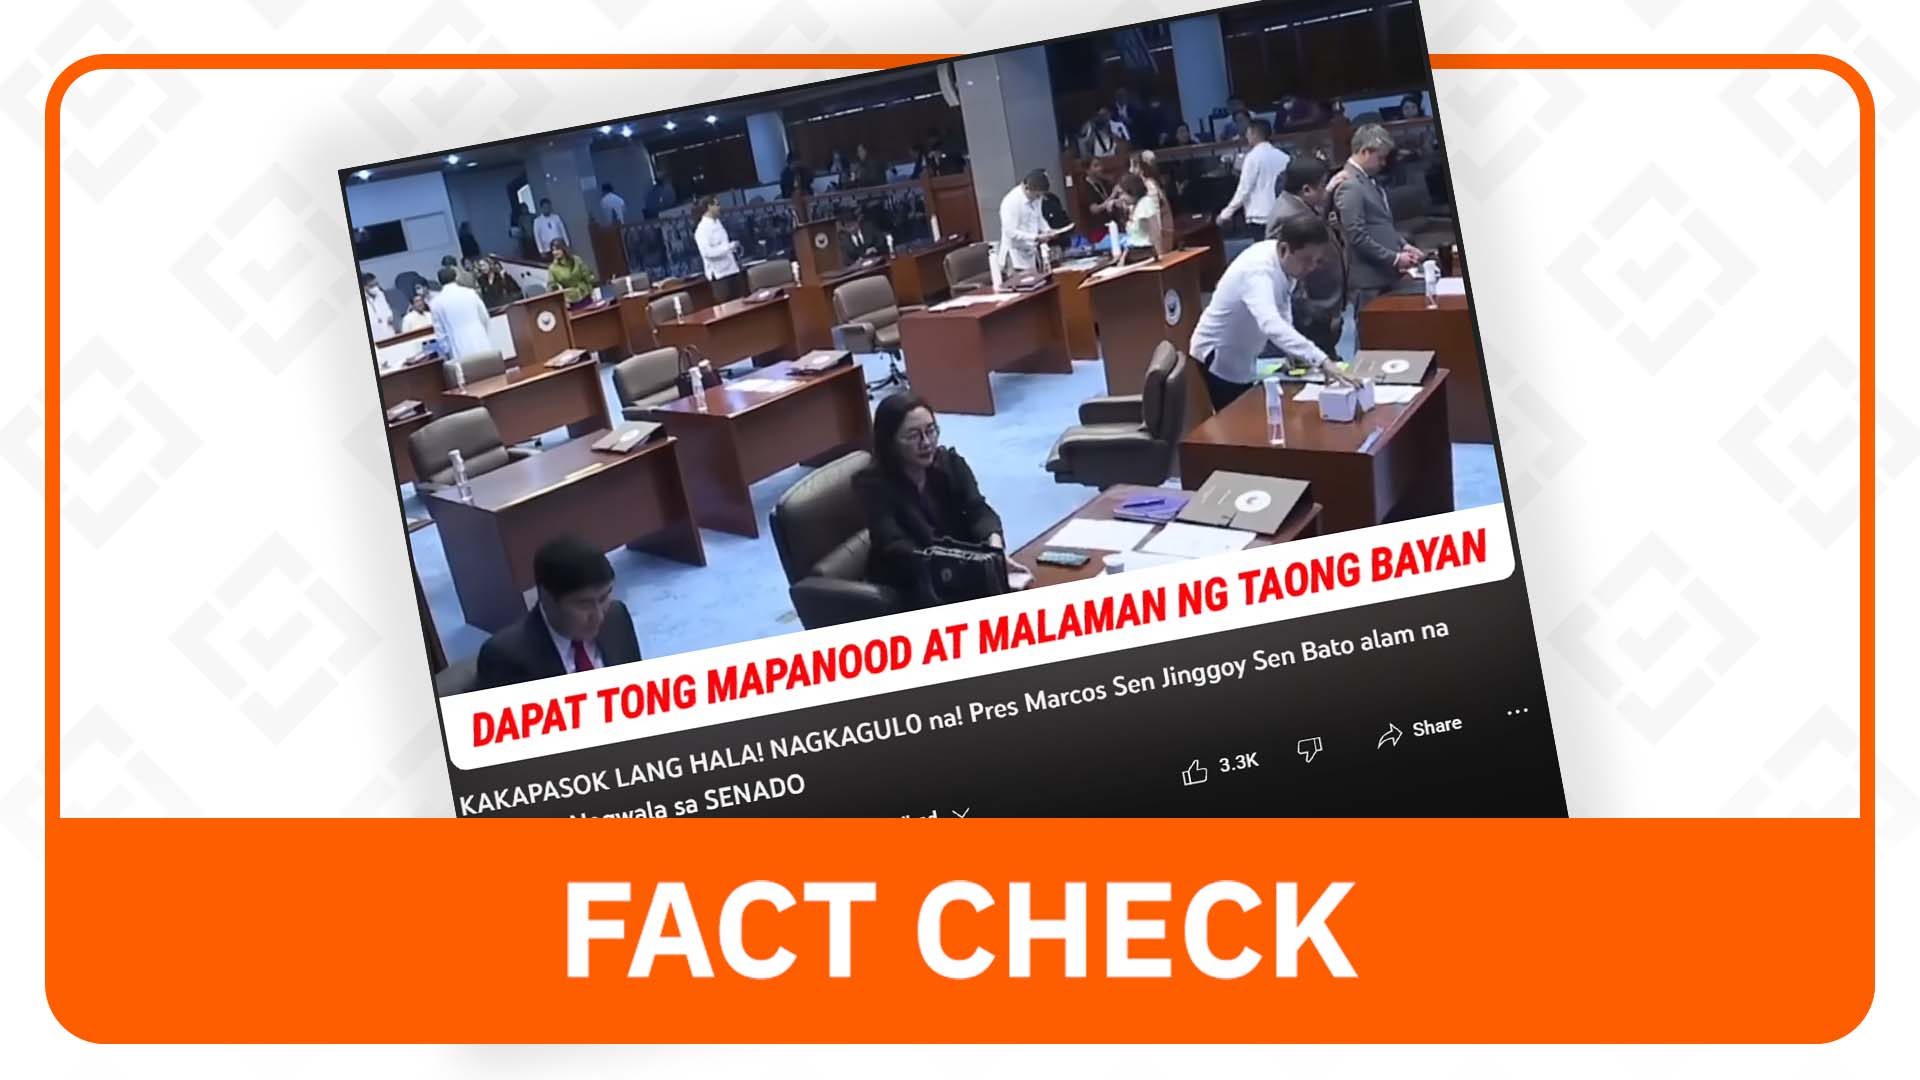 FACT CHECK: No senator identified as behind alleged leak of executive session information